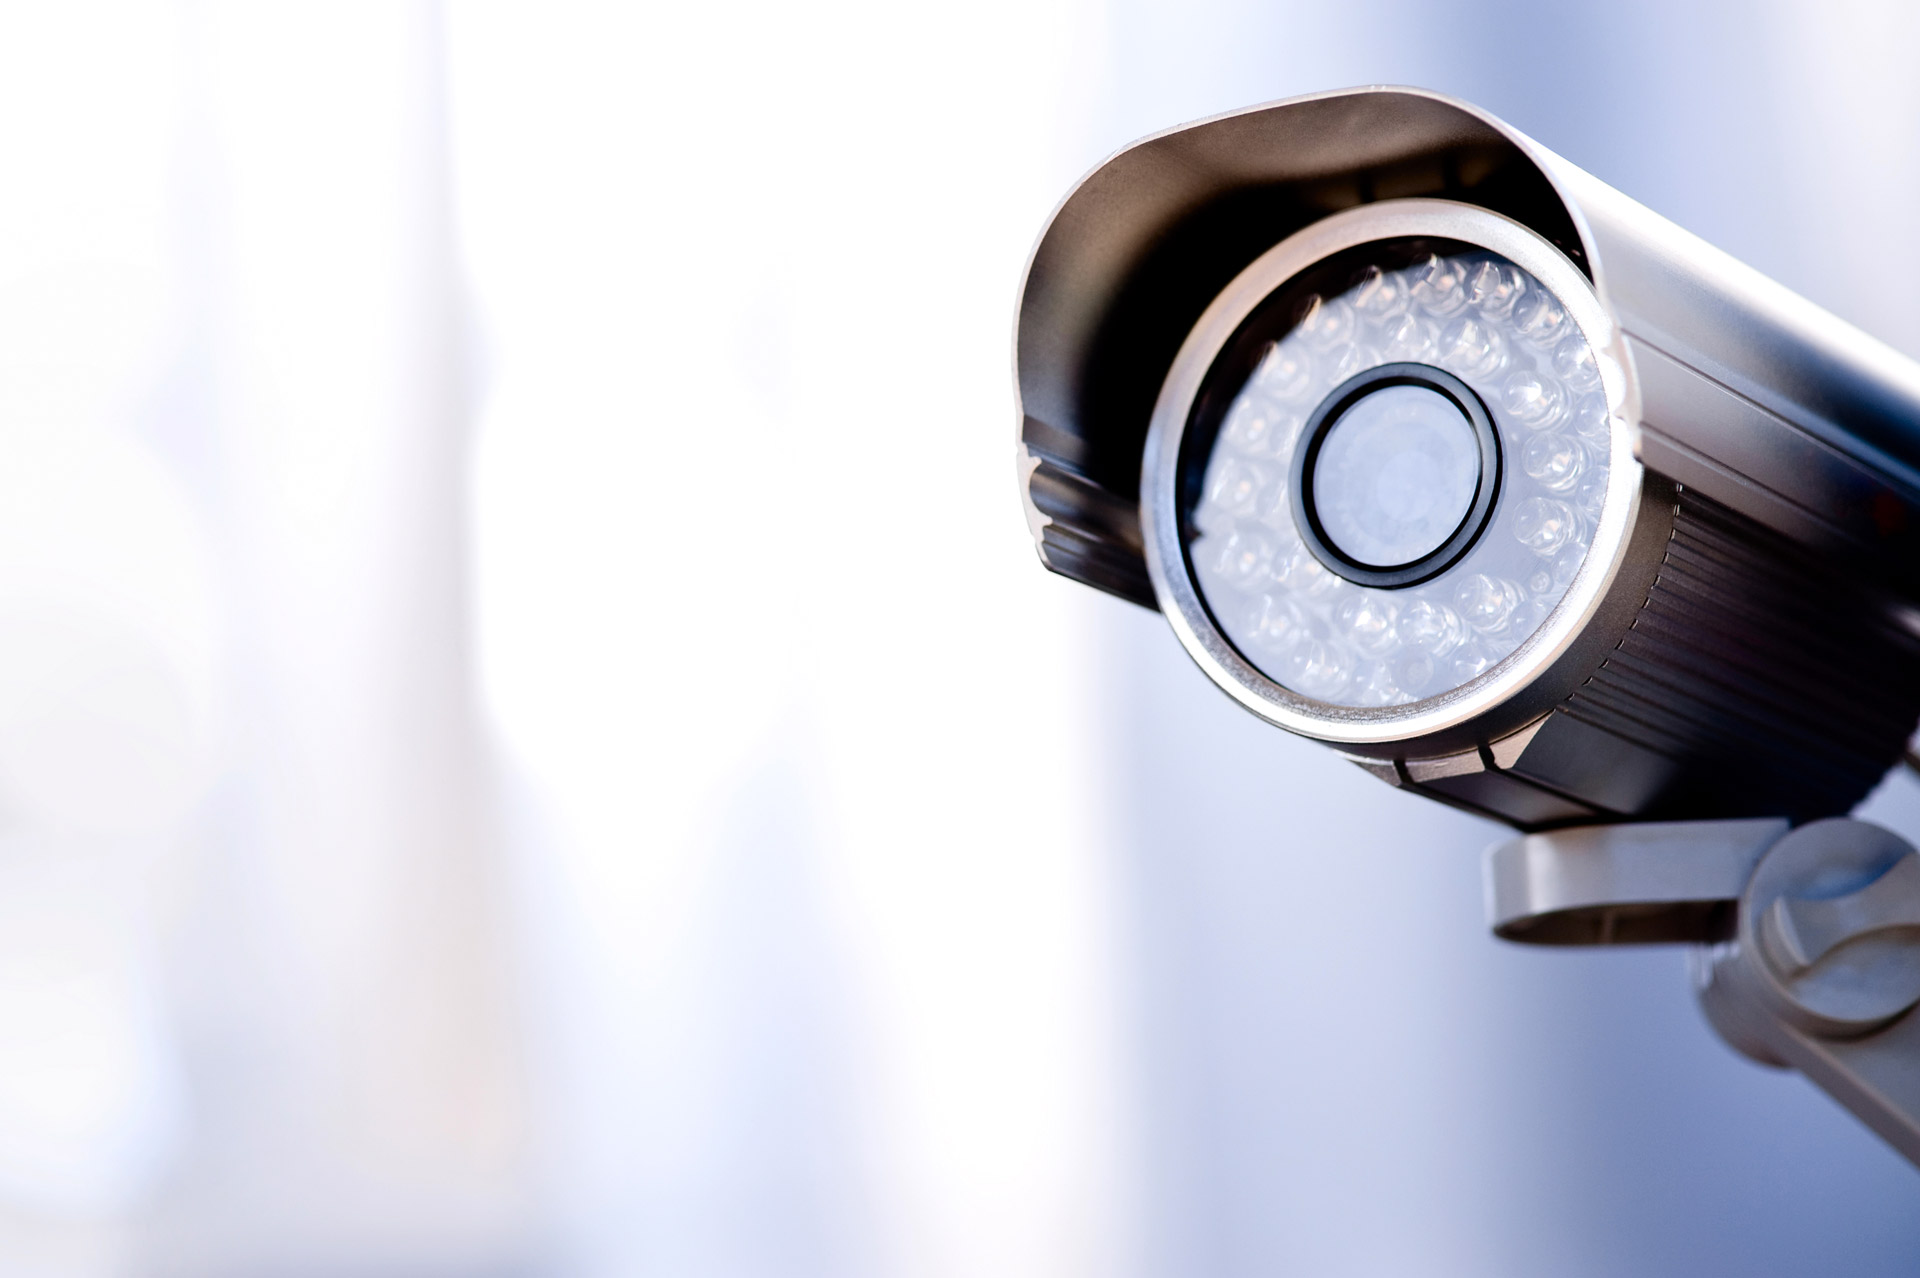 Be Proactive, Not Reactive – Security Cameras